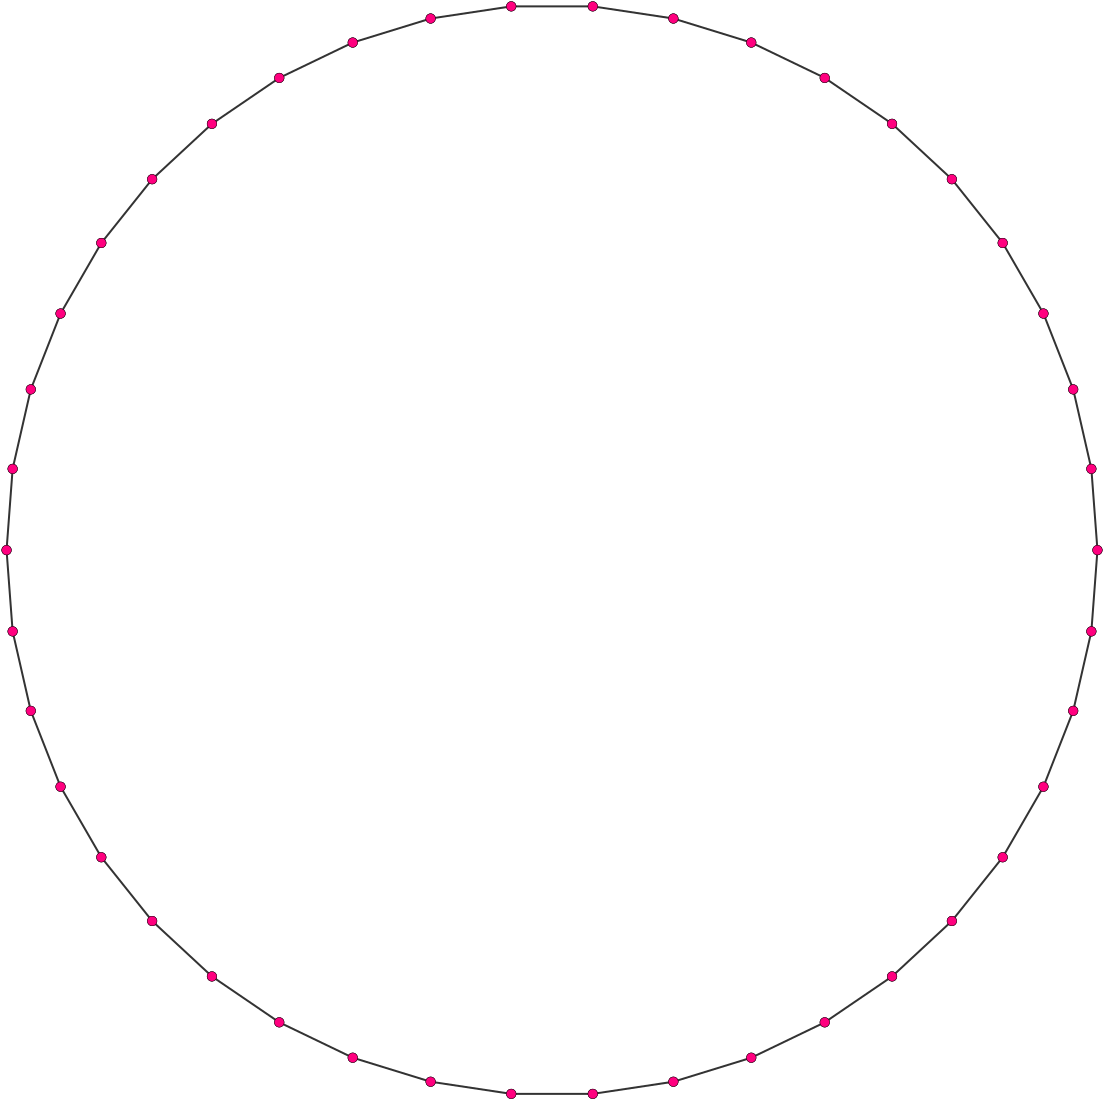 A Black Circle With Pink Dots